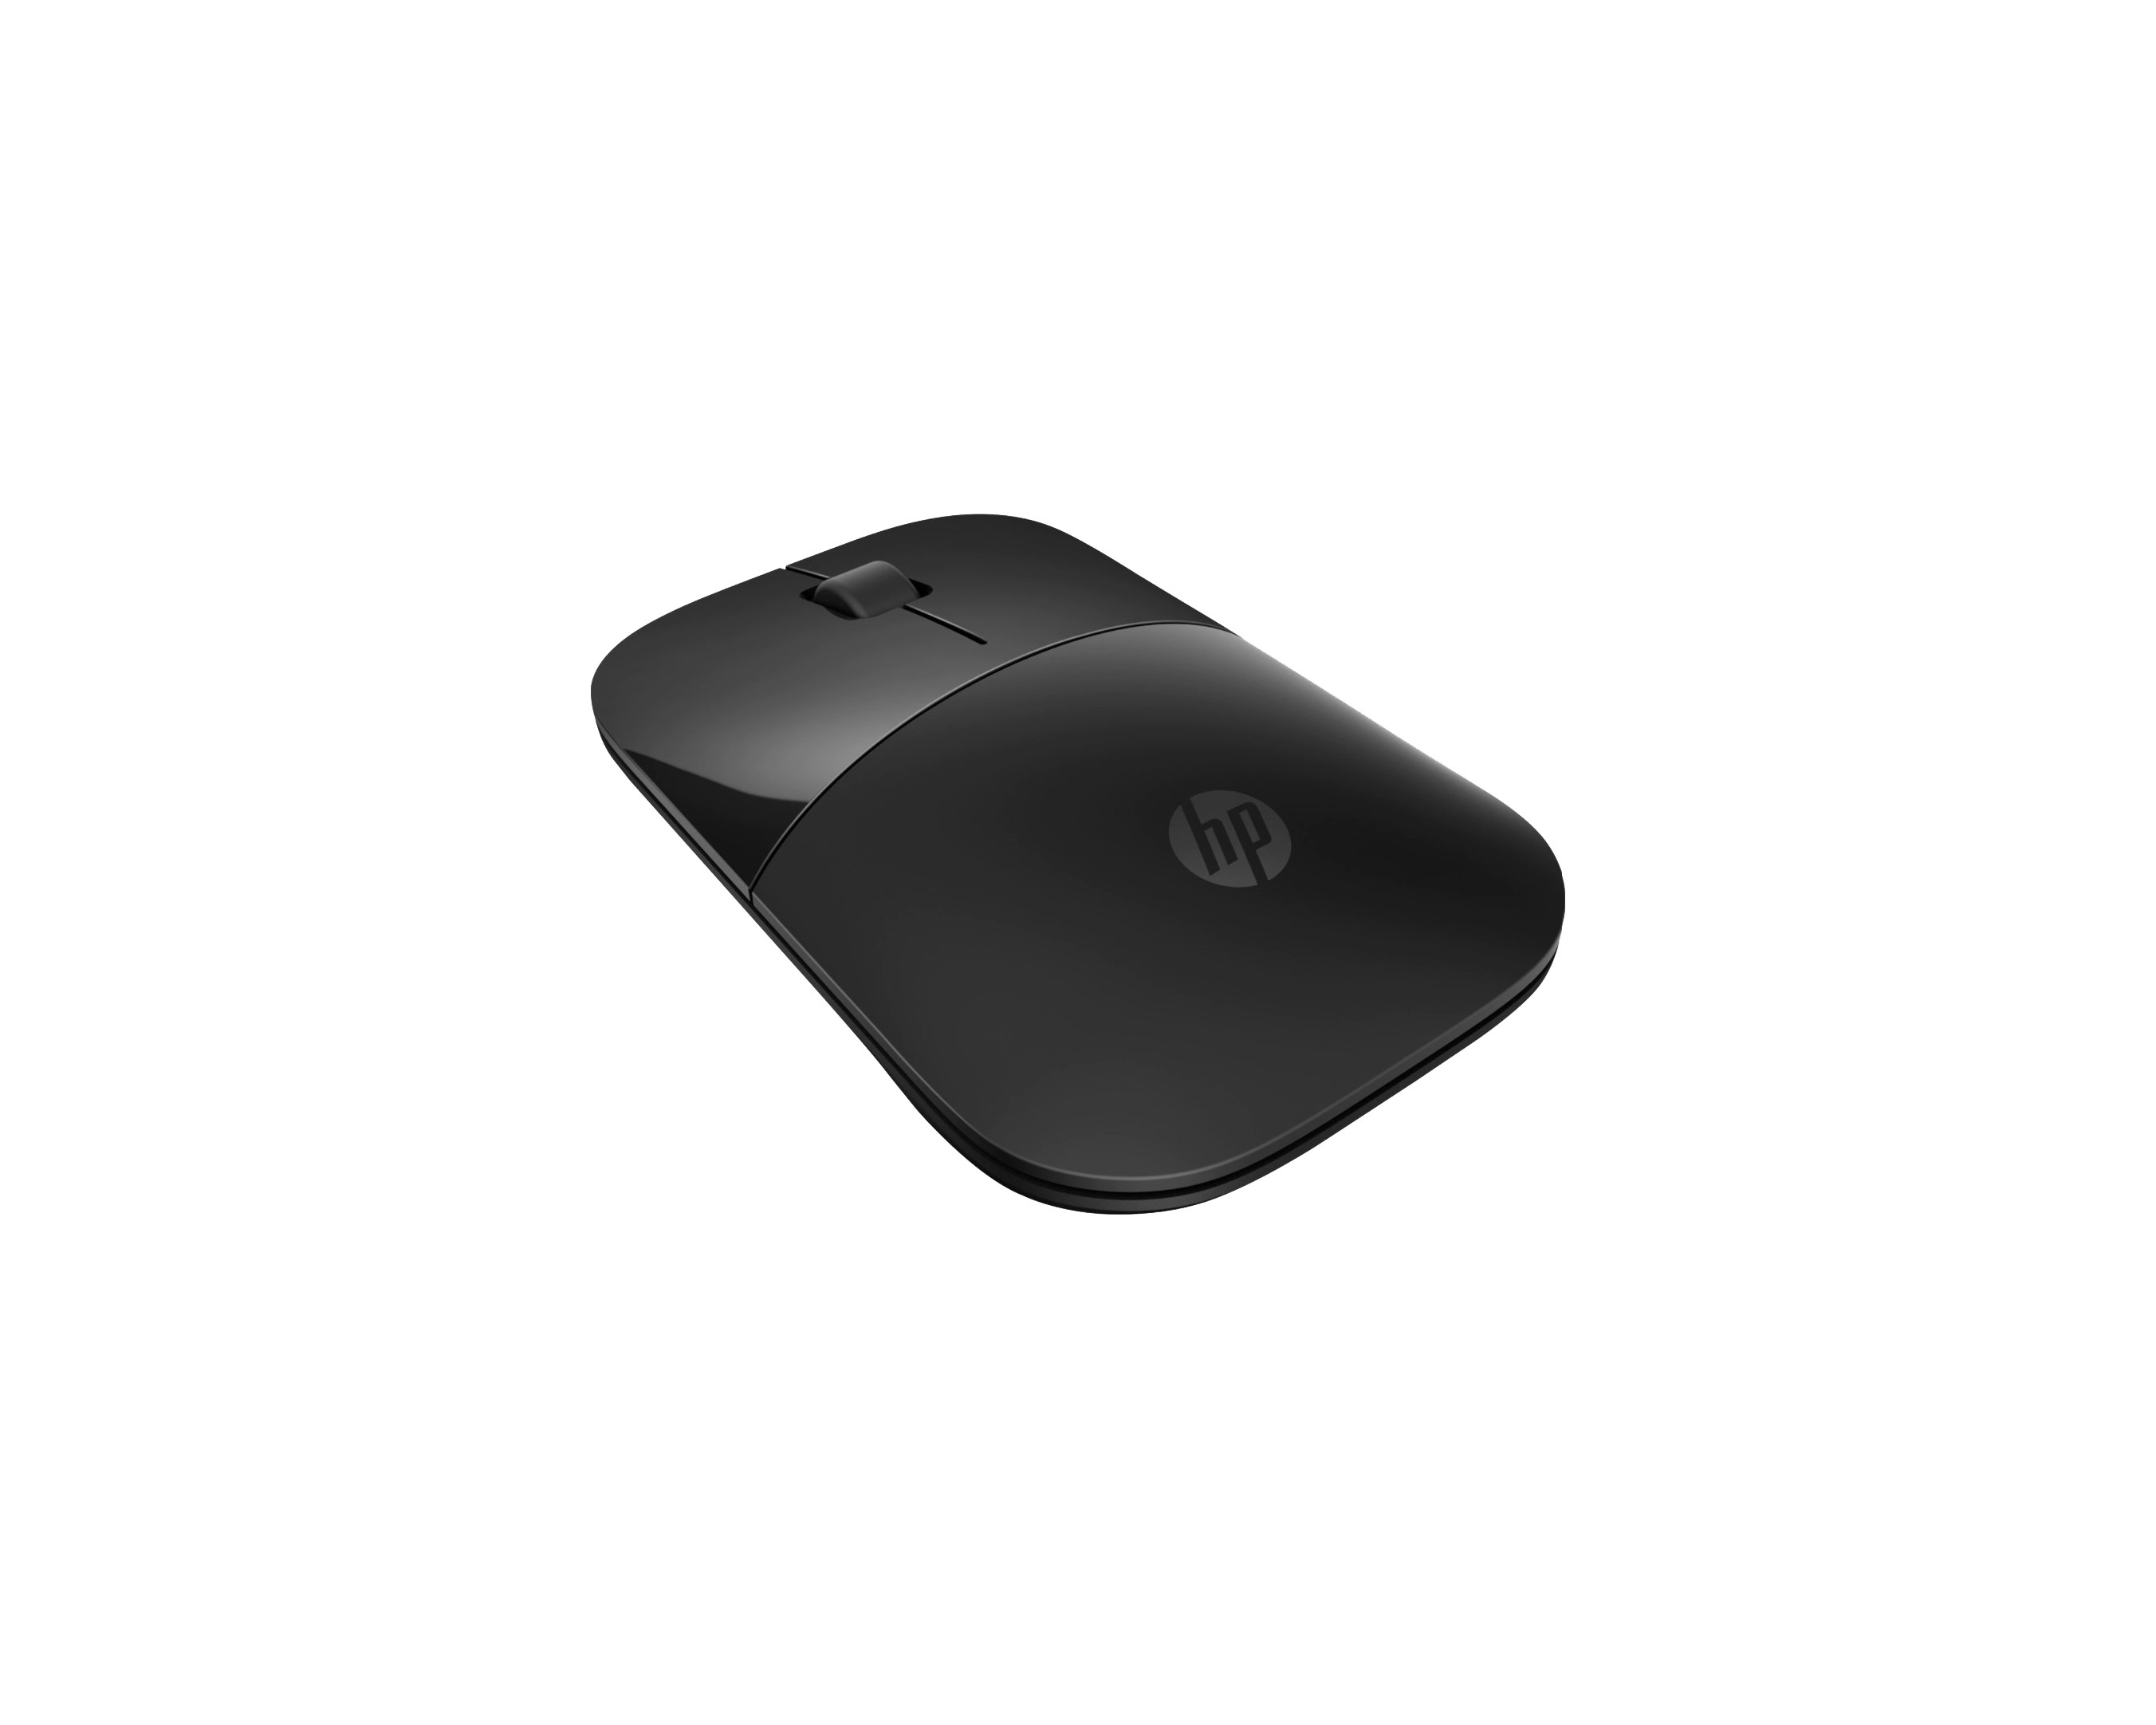 Reviewing the HP Z3700 Wireless - Mail Daily Mouse